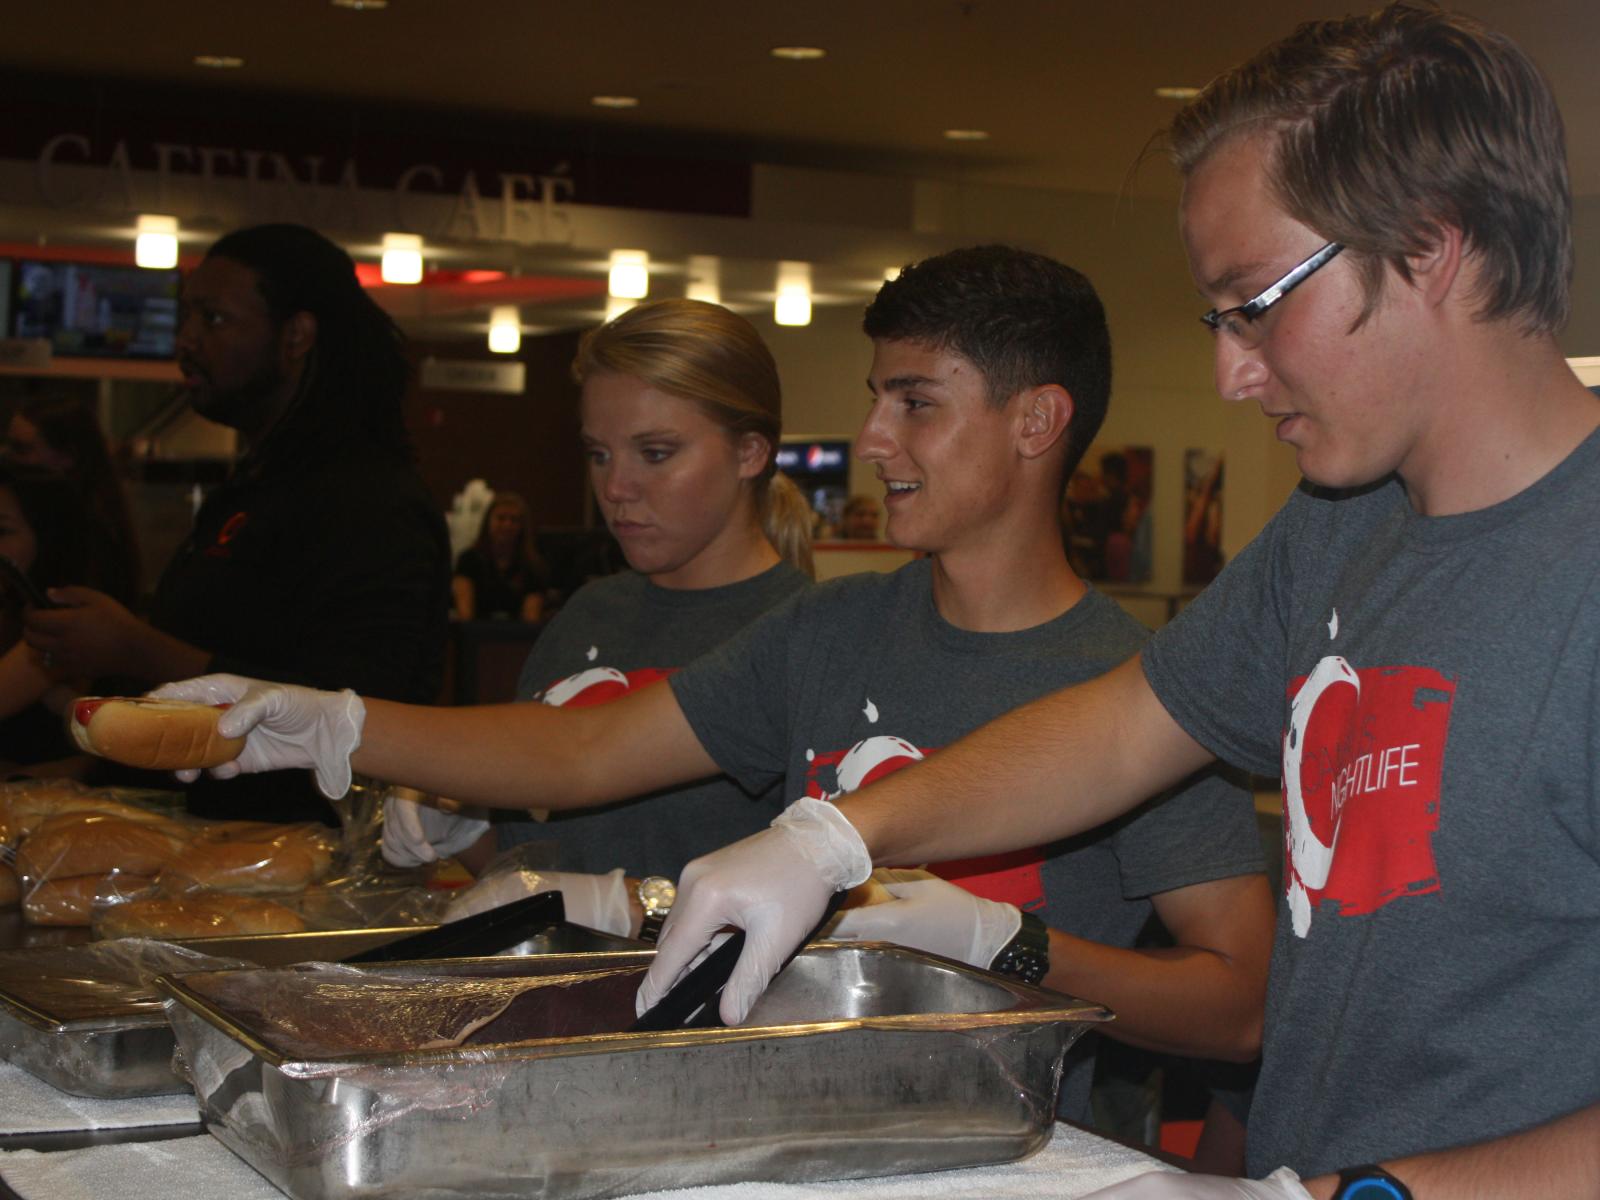 Hot dogs at Husker Watch Party served by Campus NightLife.